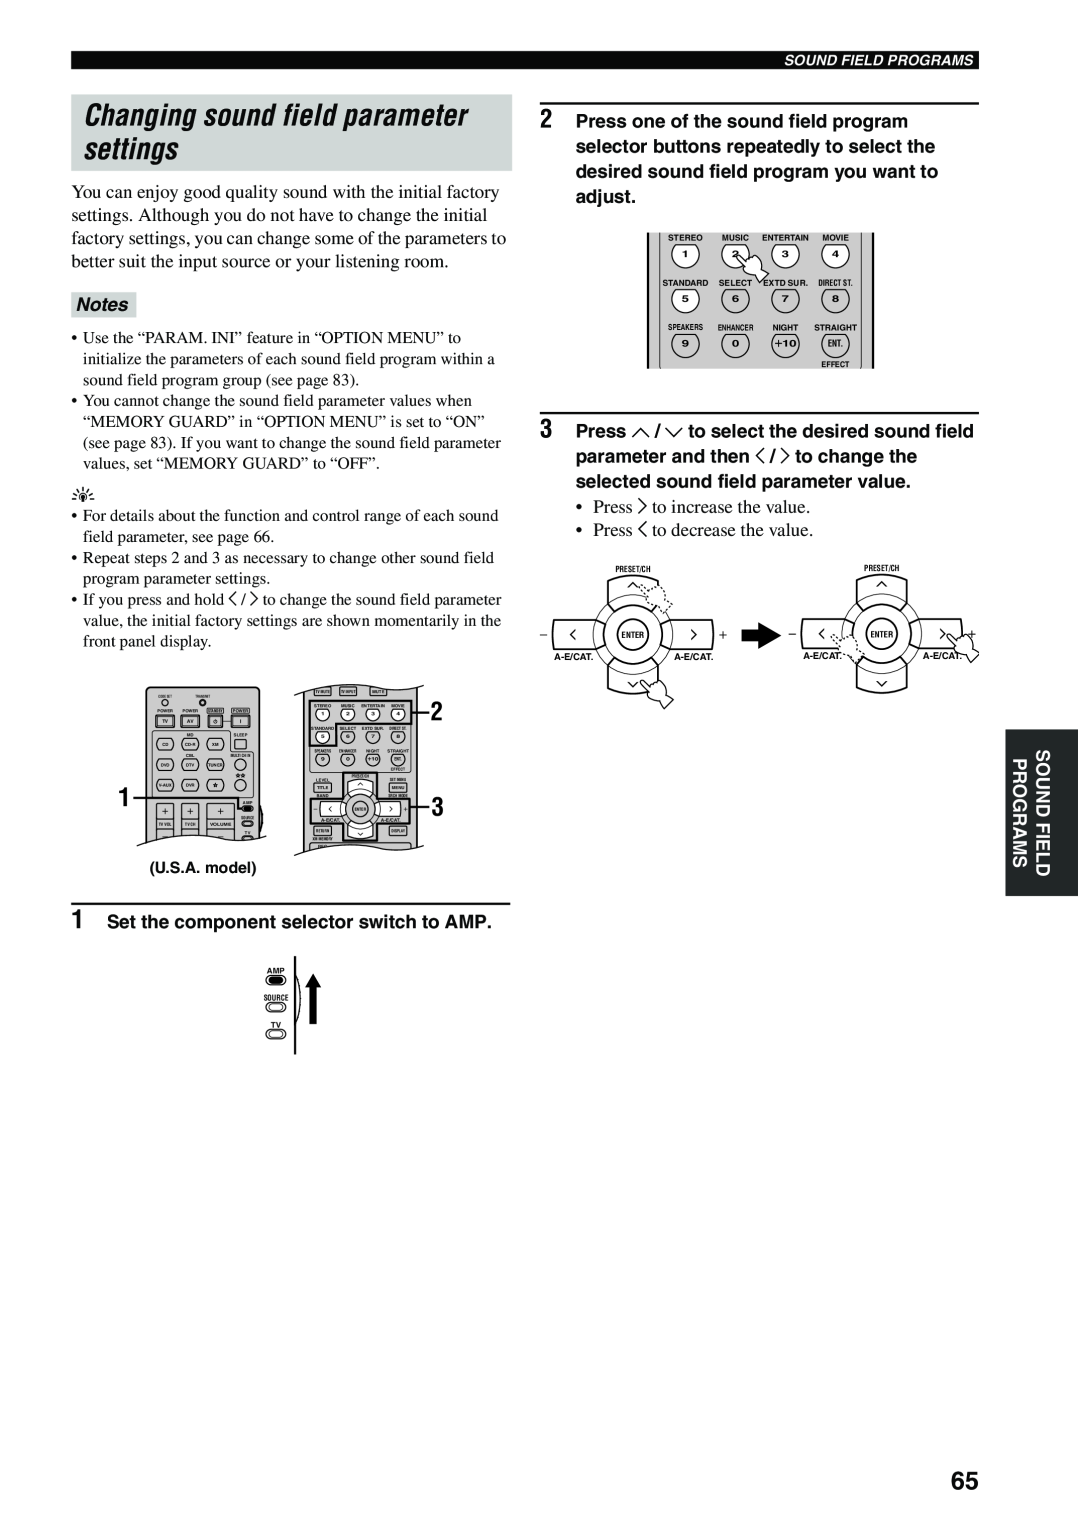 Yamaha HTR-5940 AV owner manual Changing sound field parameter settings, Notes, 1Set the component selector switch to AMP 